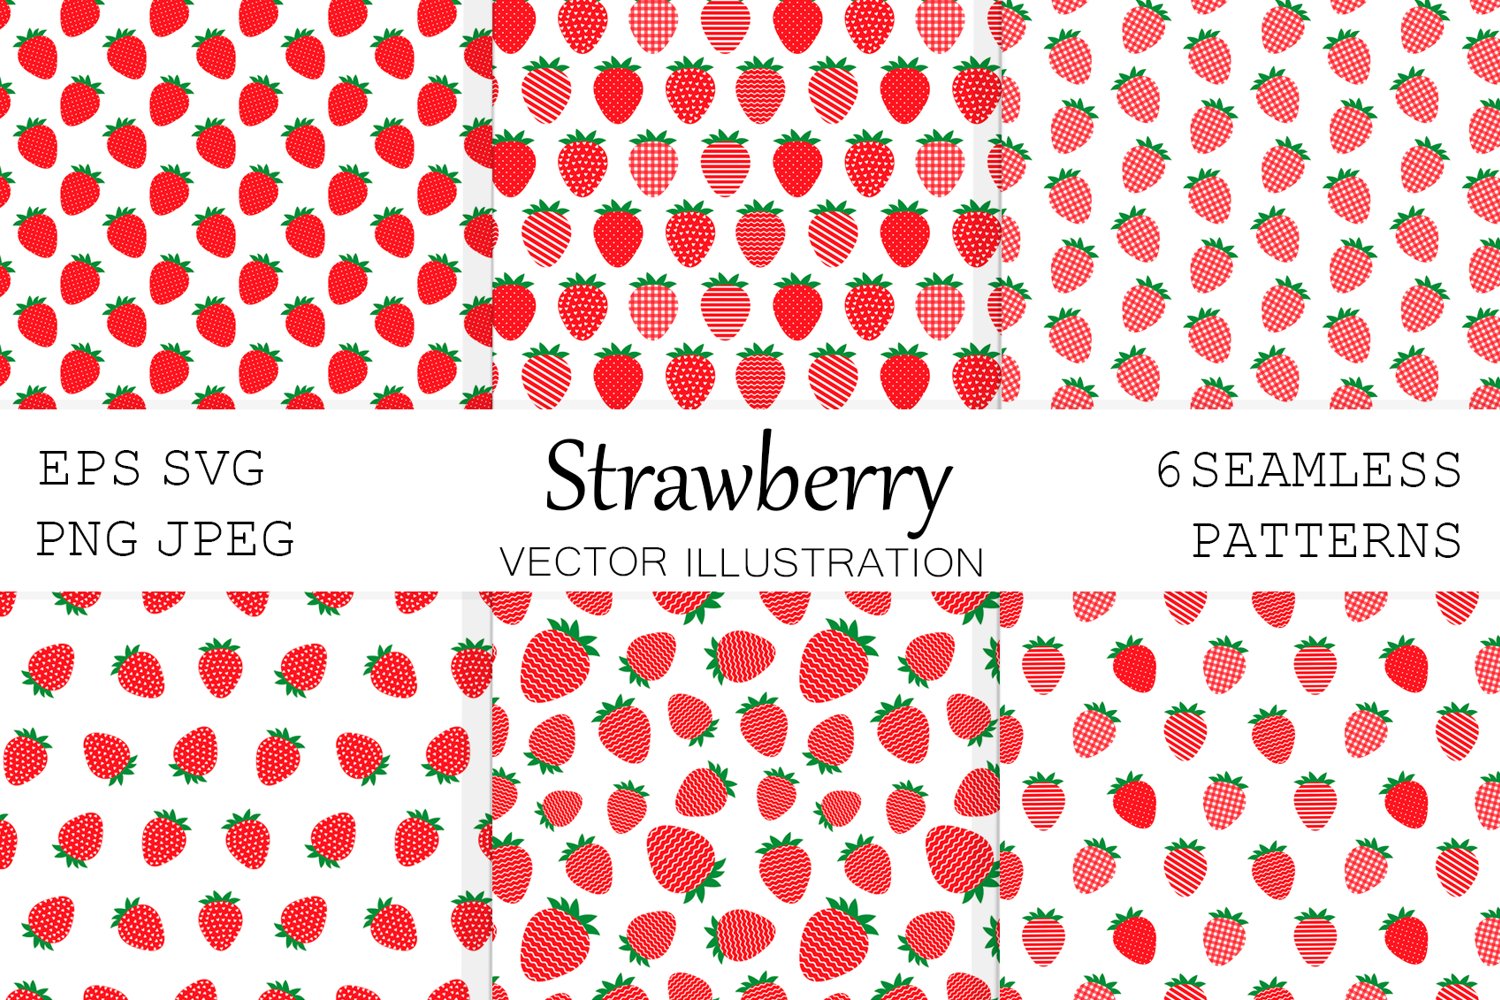 Cover image of Strawberry Seamless Pattern.